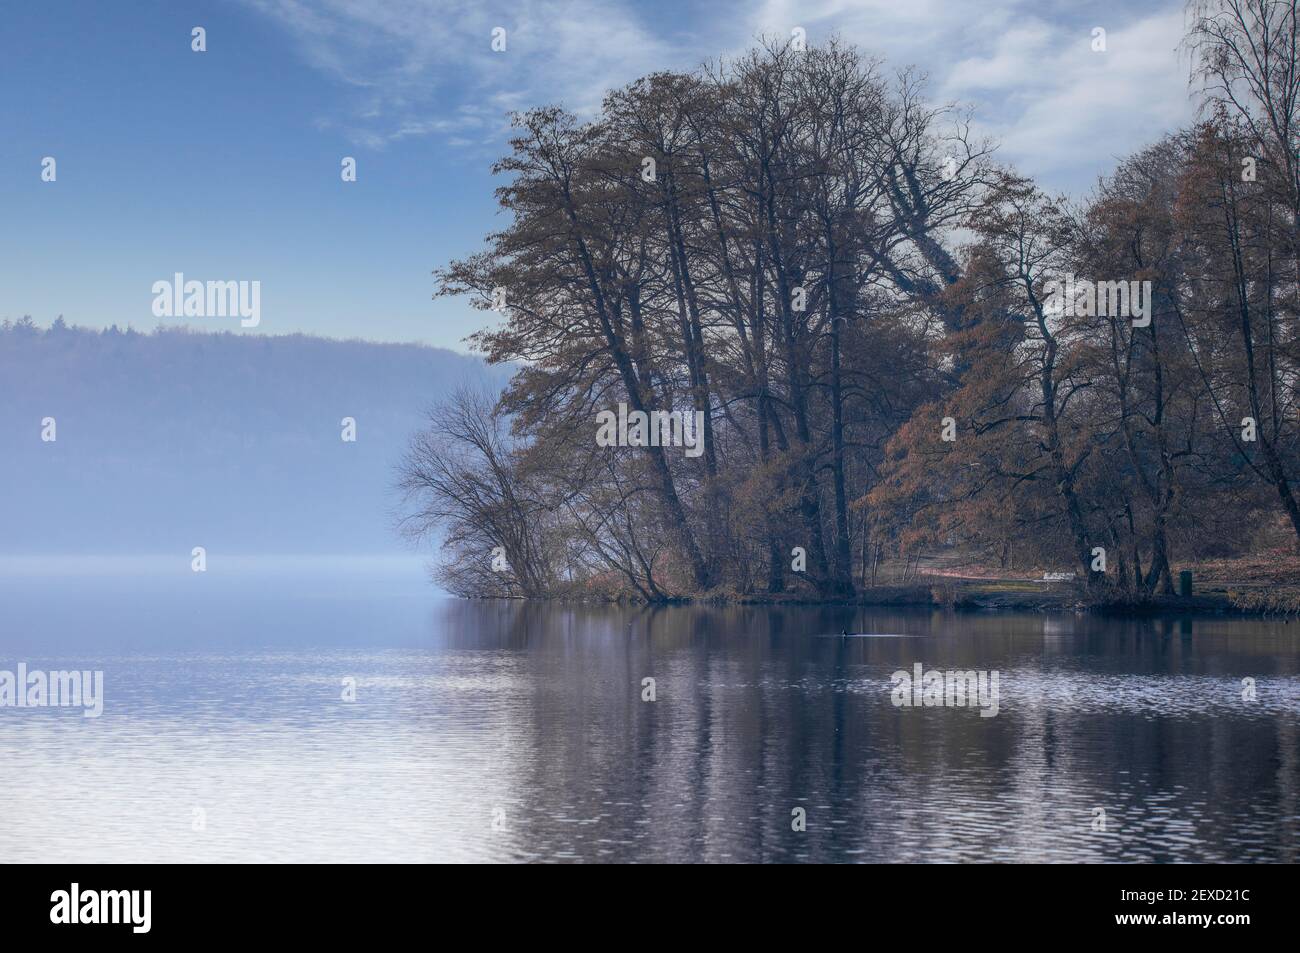 The Dieksee in Malente in winter fog. The wet cold weather hardly bothered with this magical mood. Stock Photo